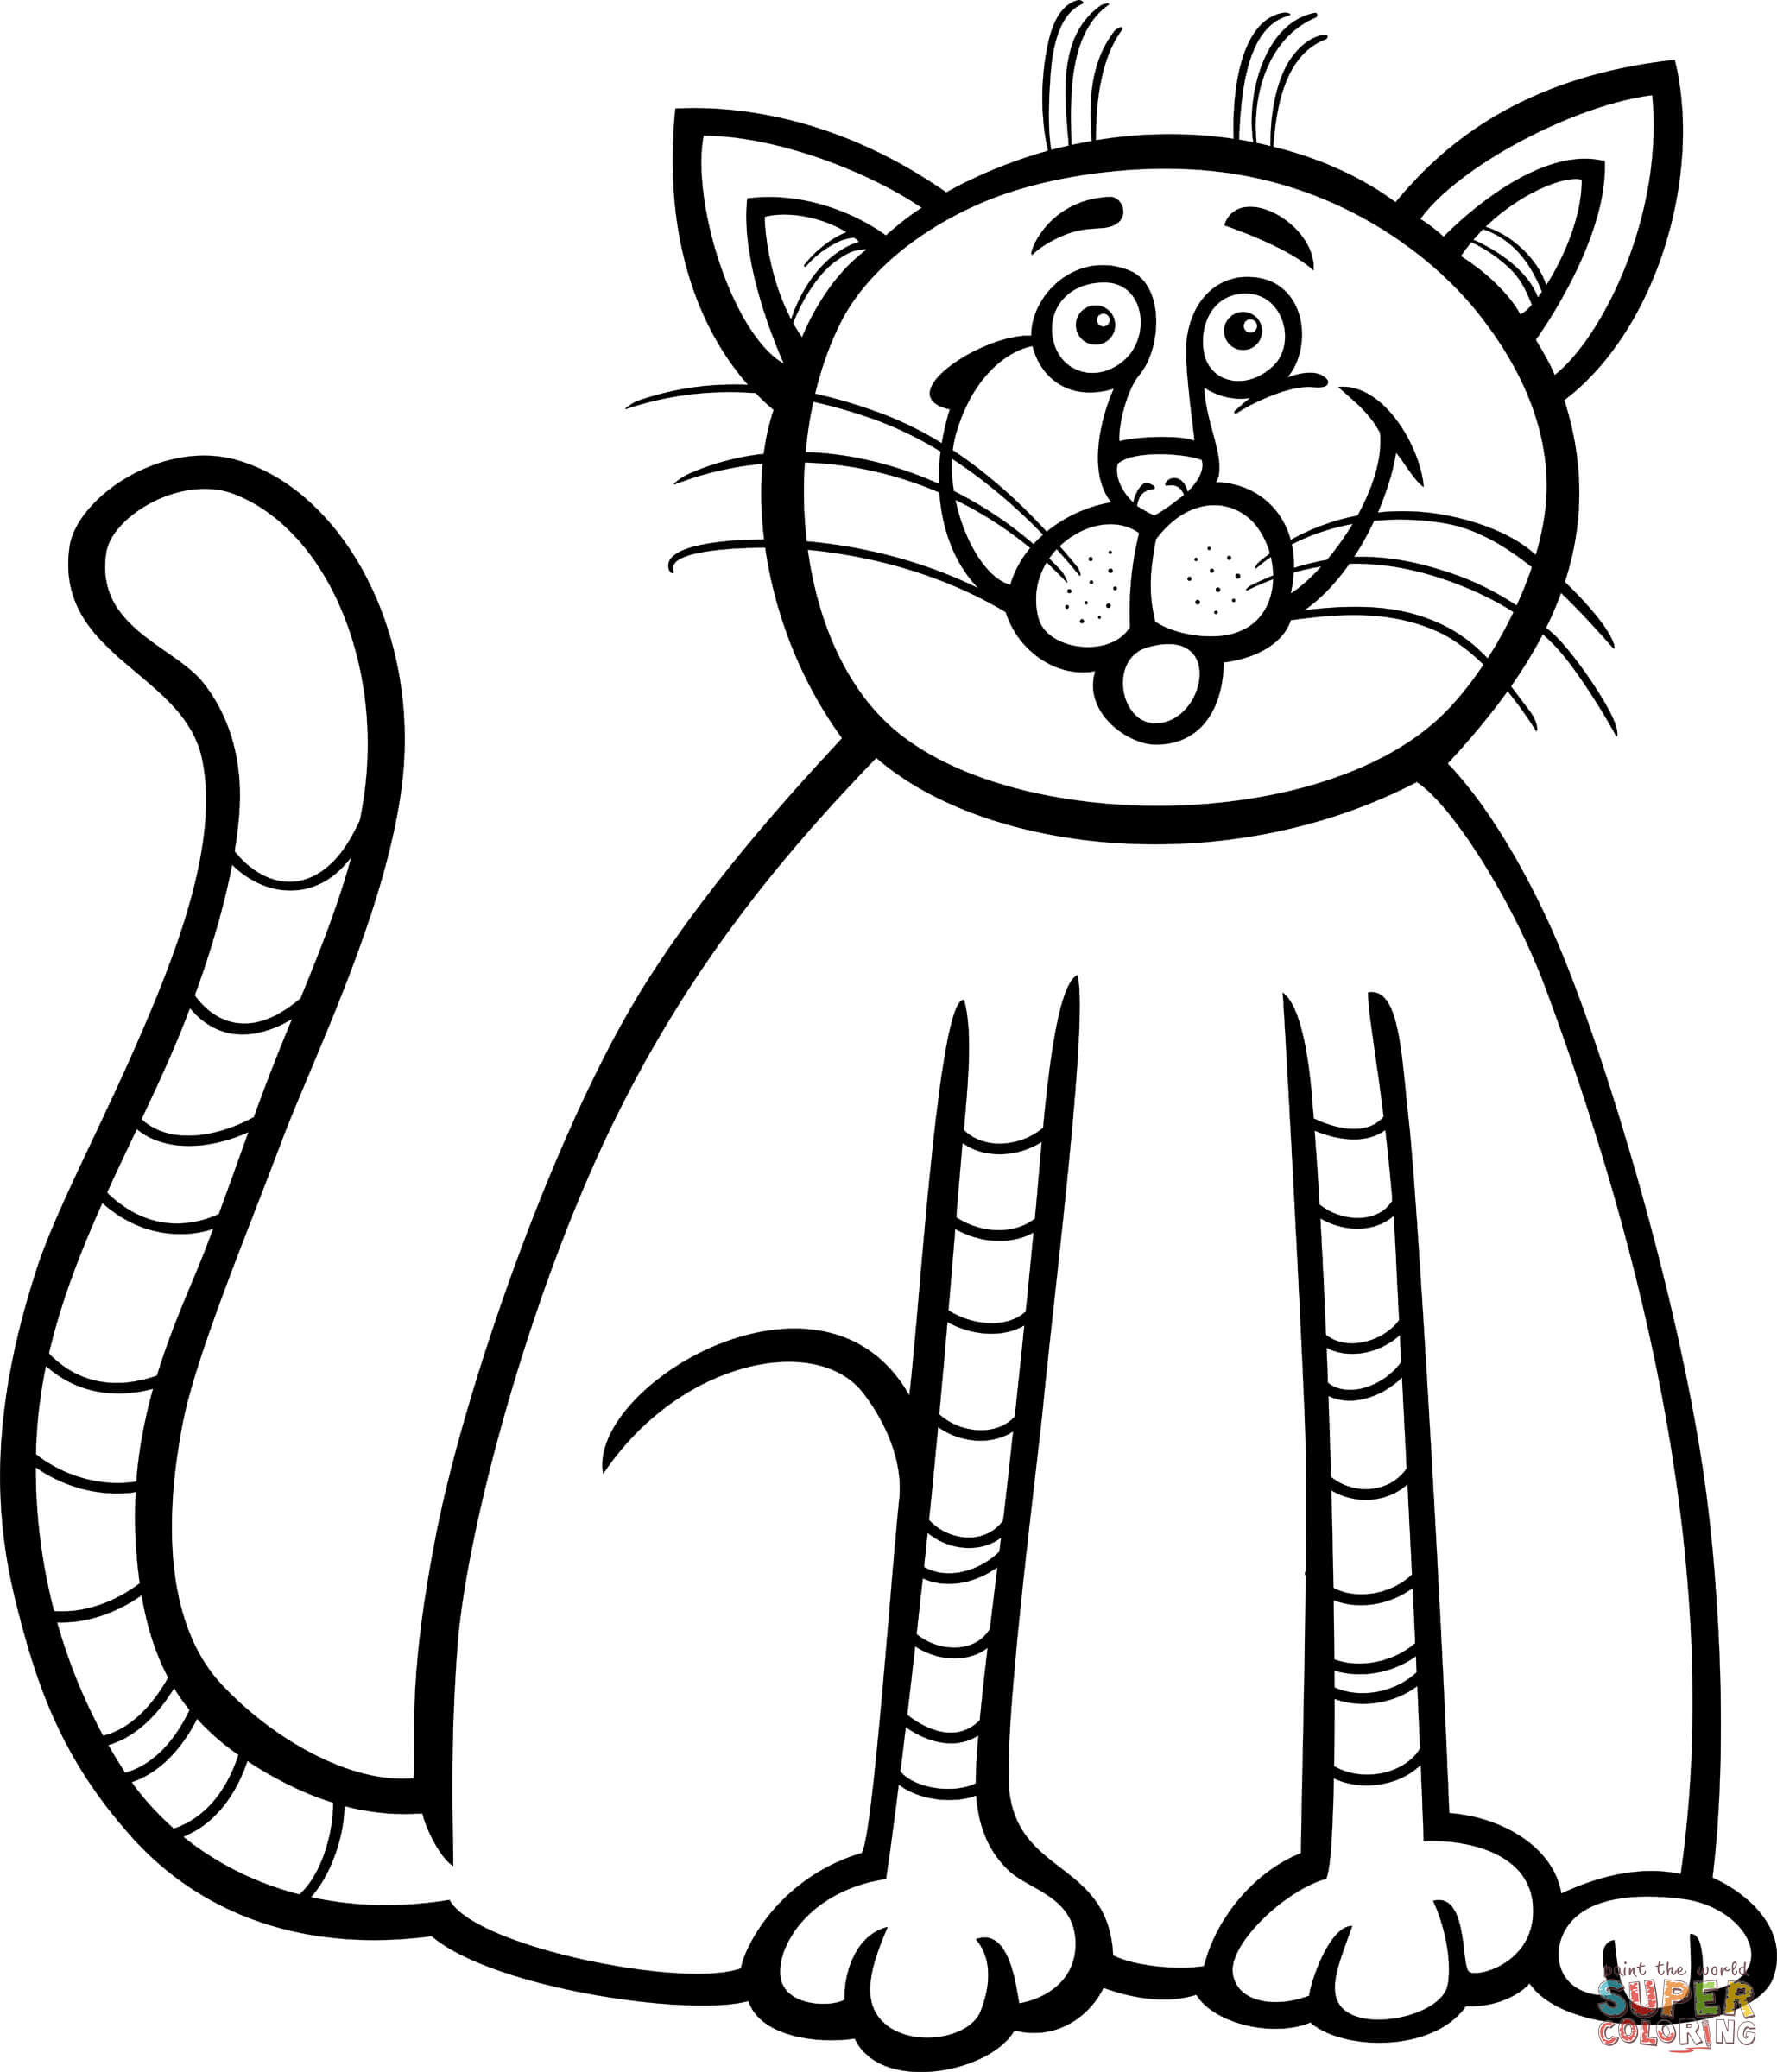 Baby Kitten Coloring Pages at GetColorings.com | Free printable